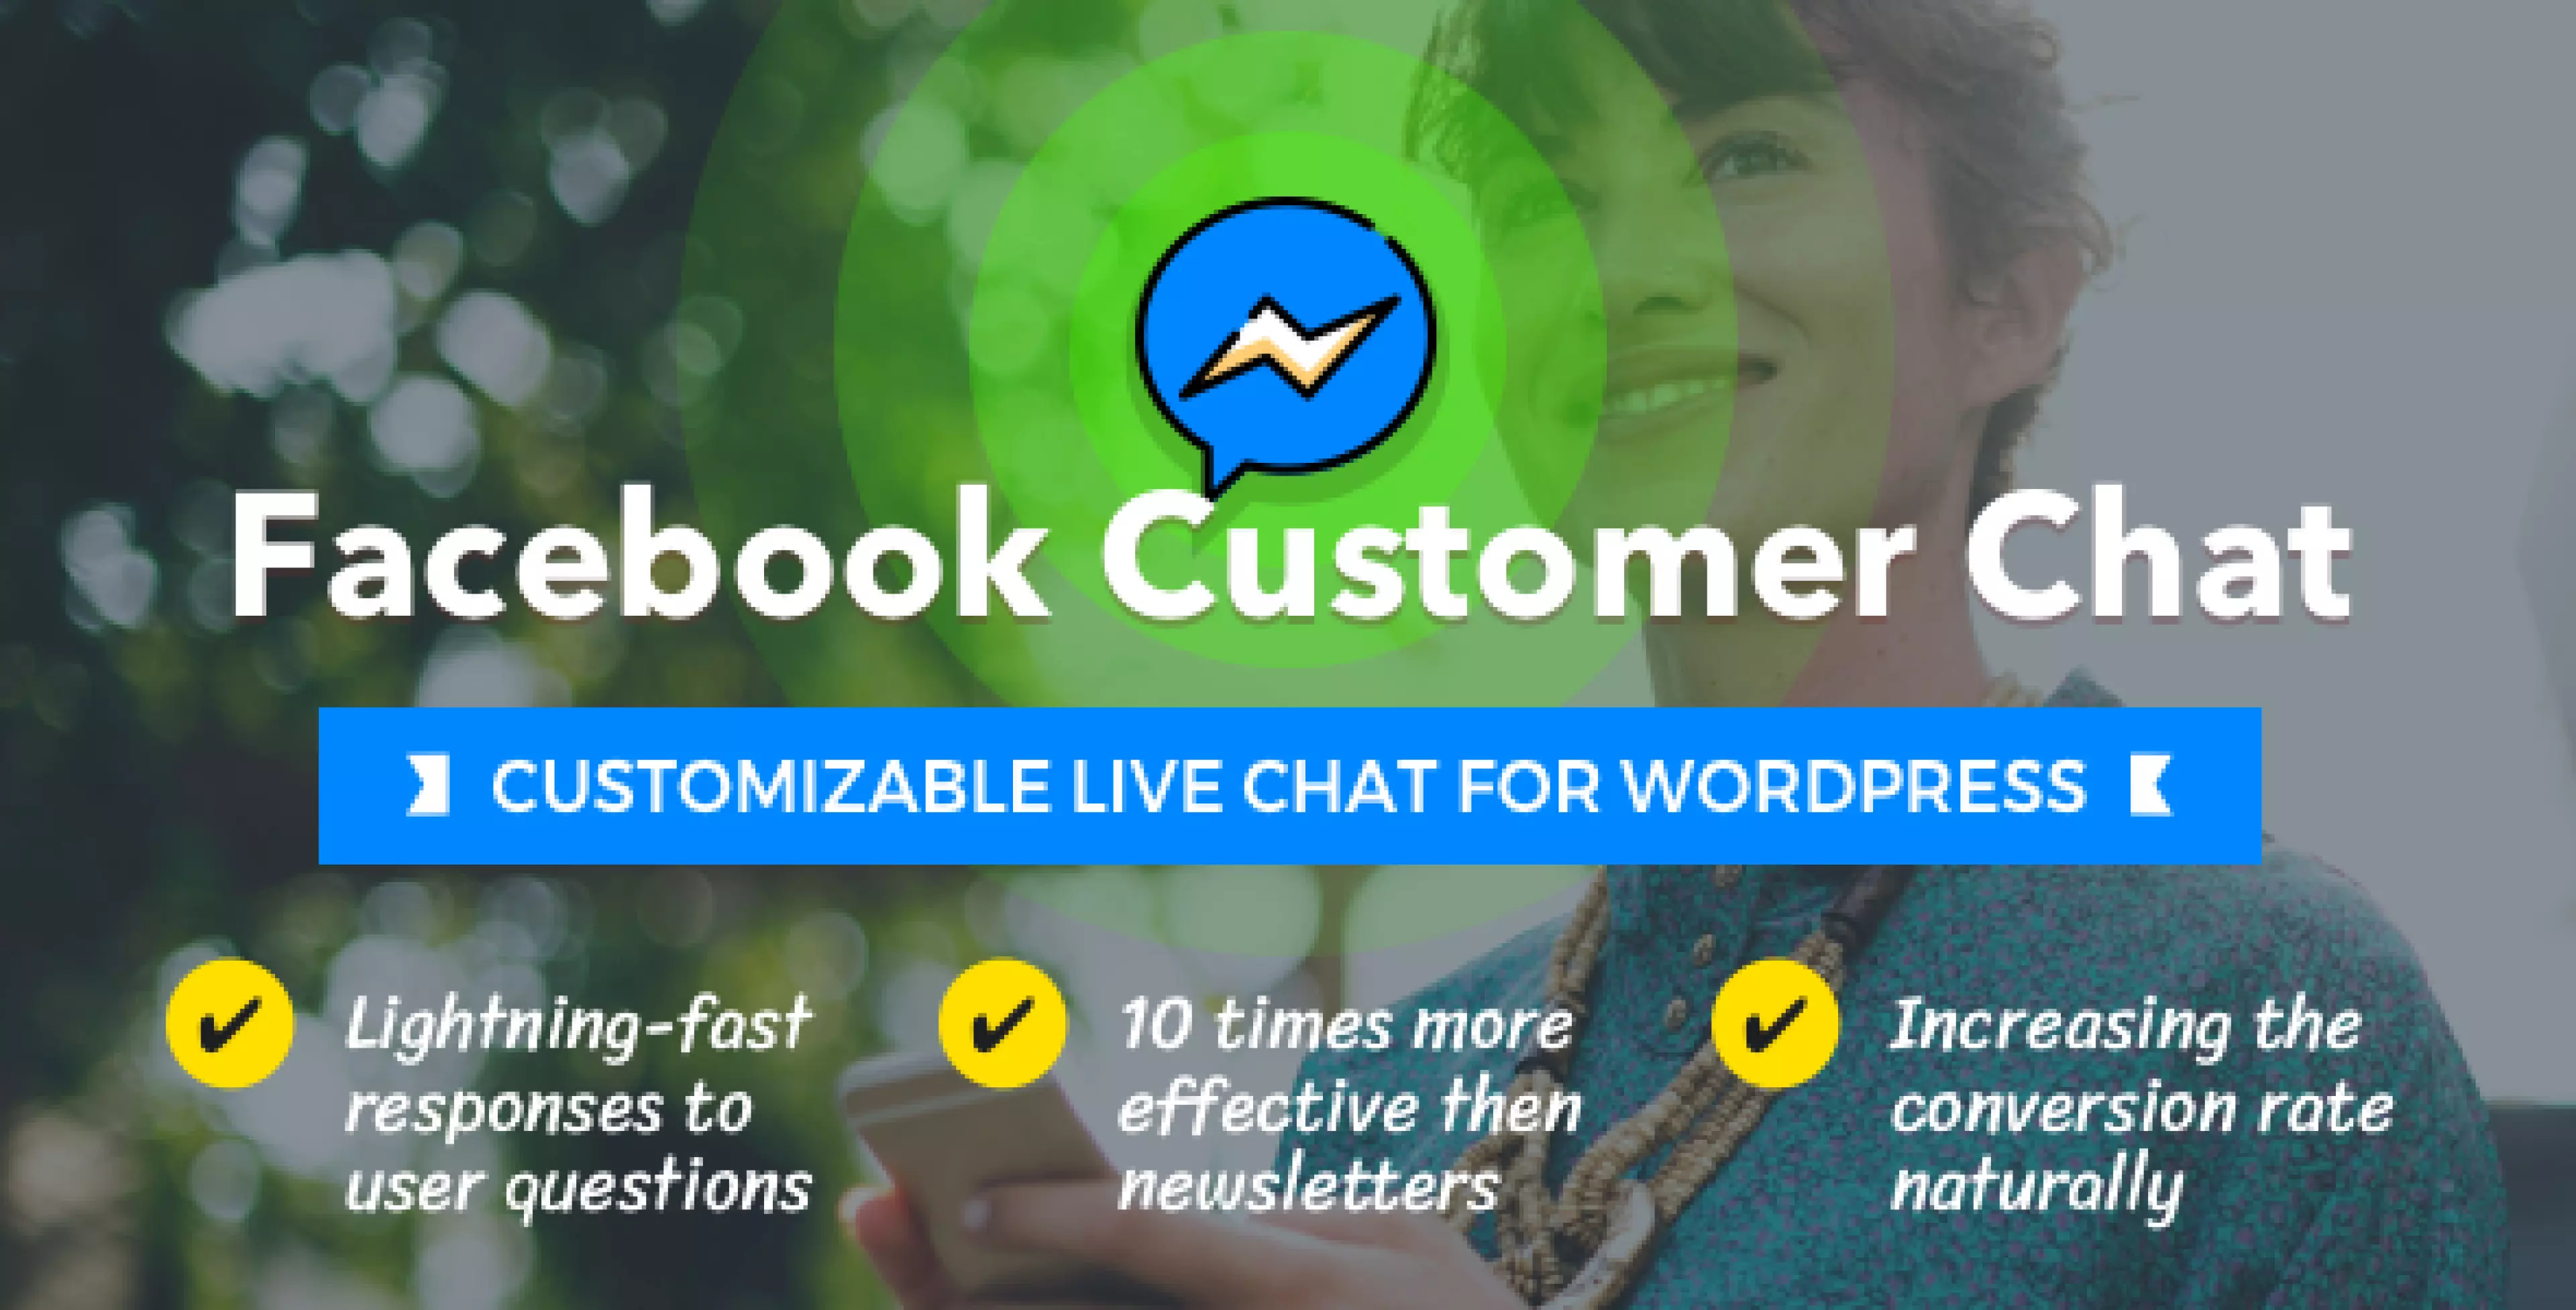 Facebook Customer Chat - Customizable Live Chat for WordPress